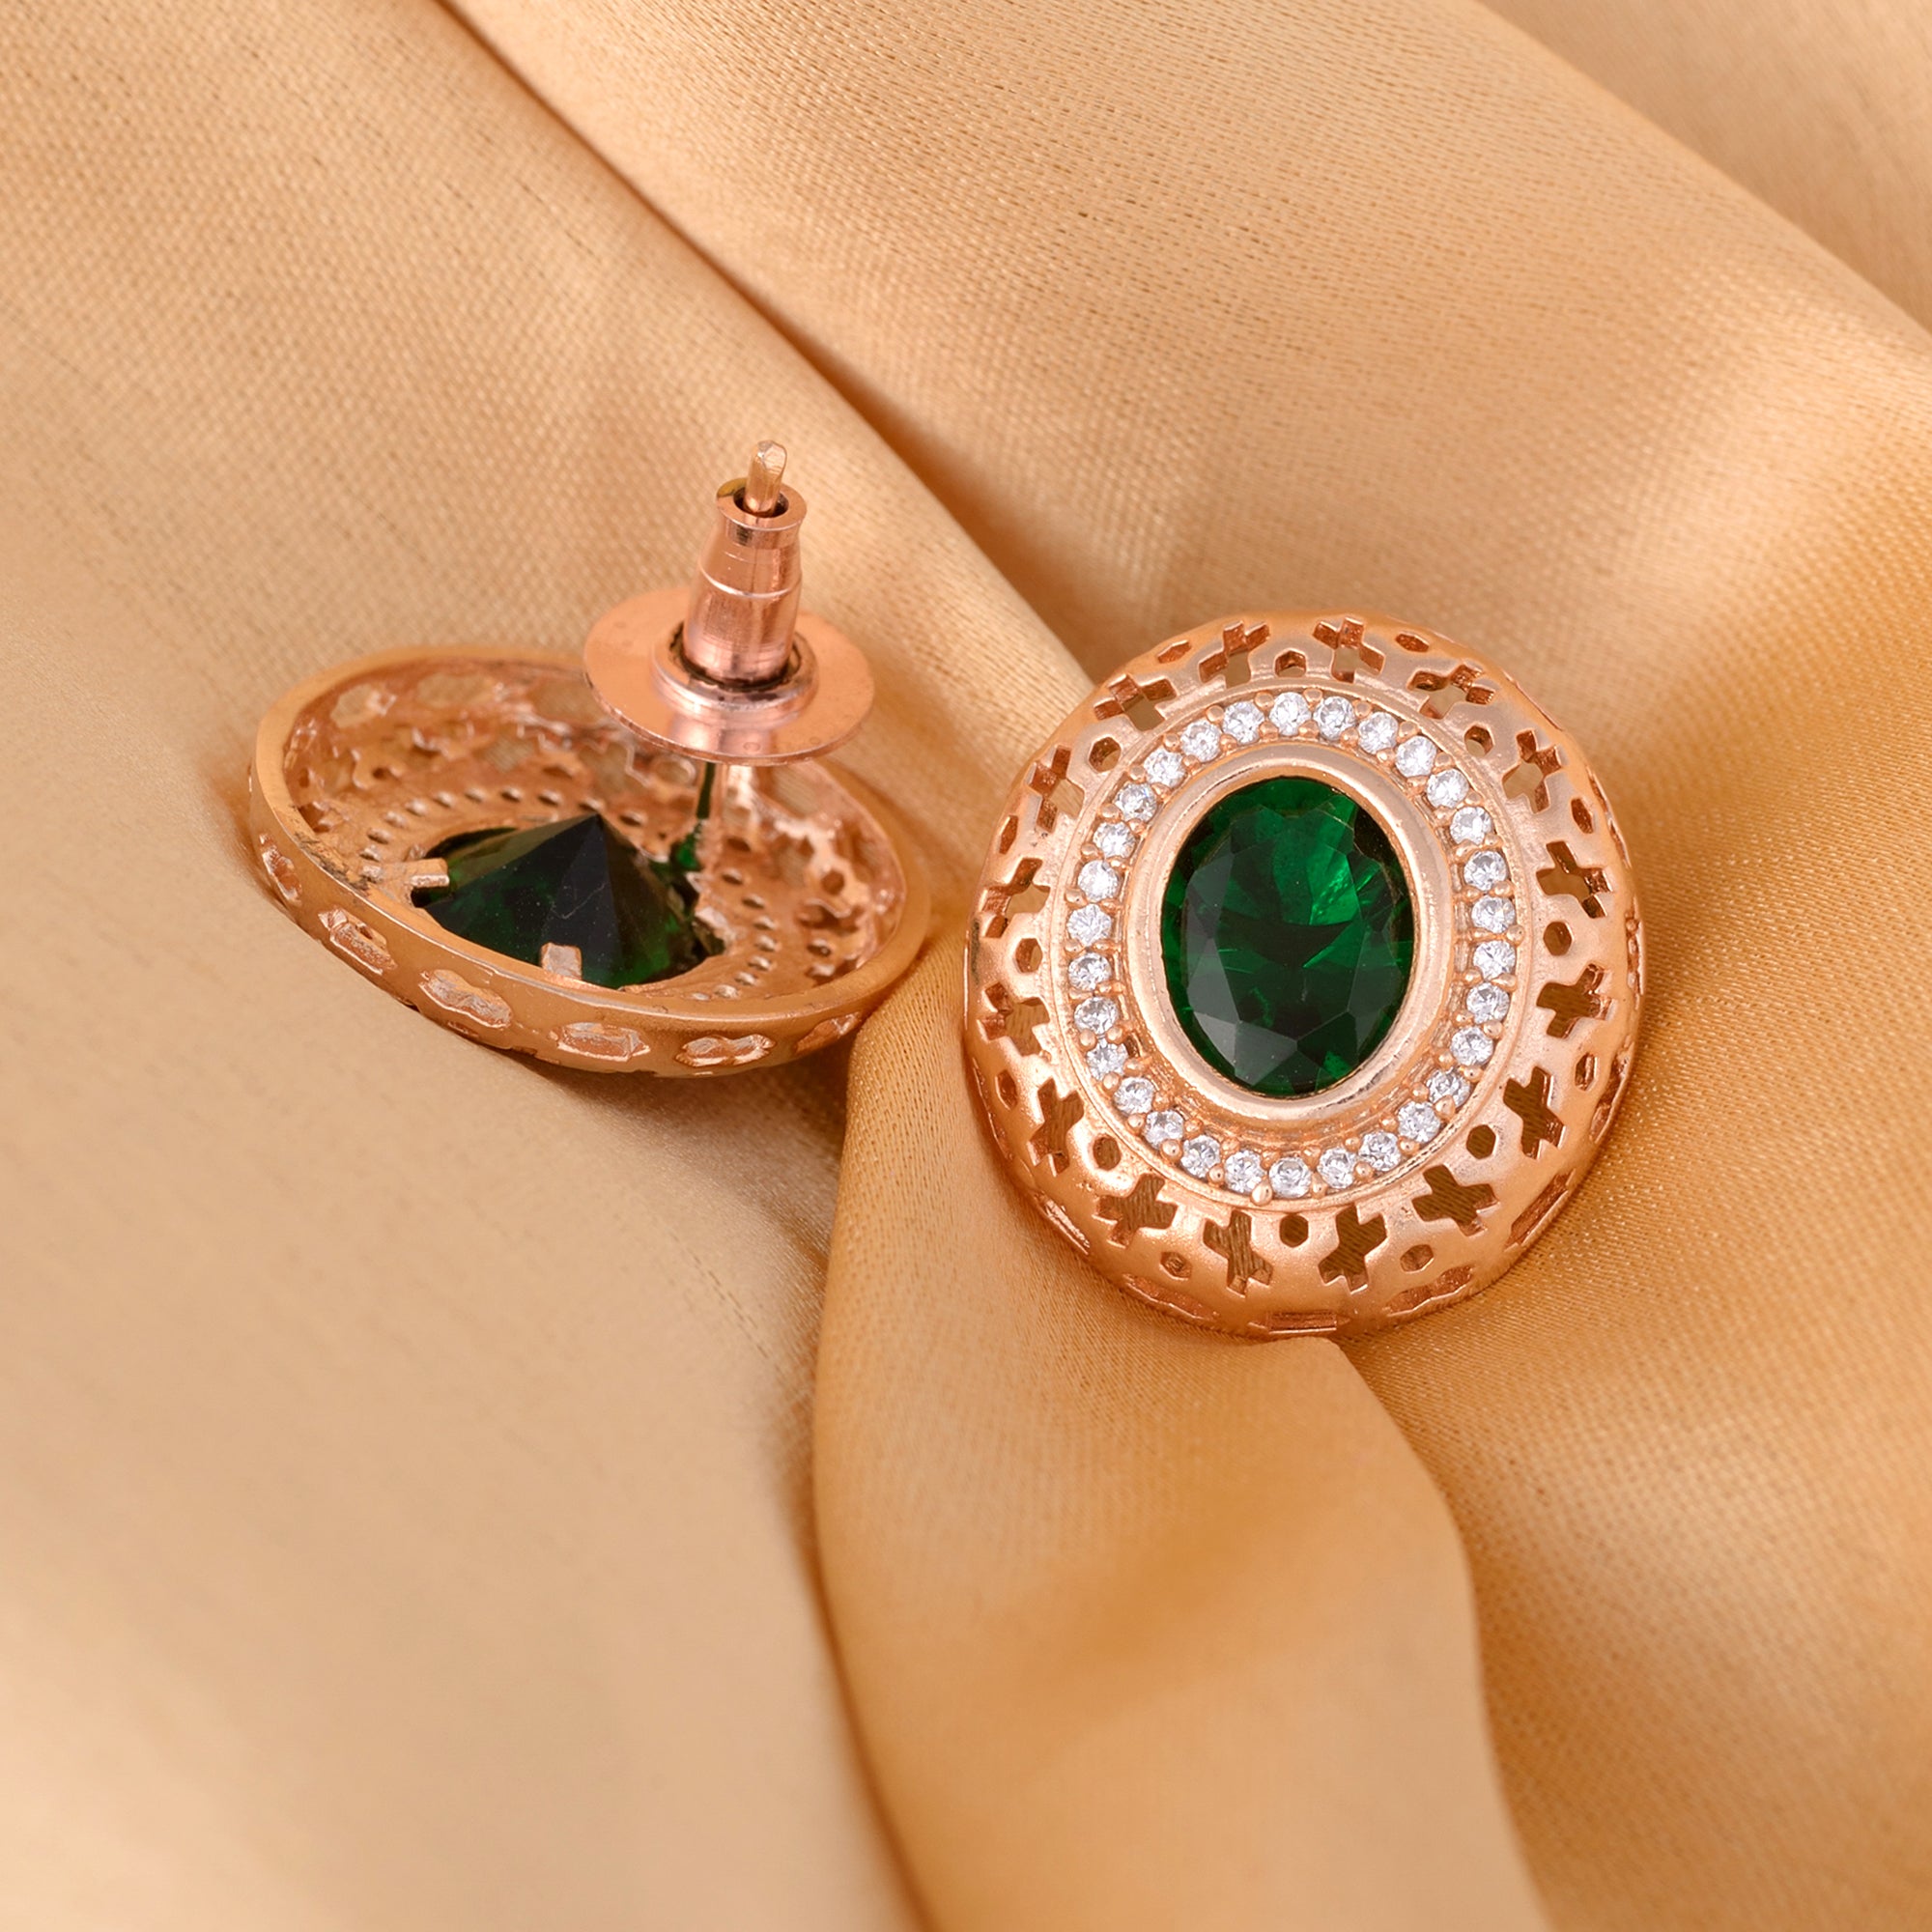 Royal Emerald Studs Rose Gold Plated Ad Handcrafted Tops Green Small Earrings for Women and Girls - Saraf RS Jewellery